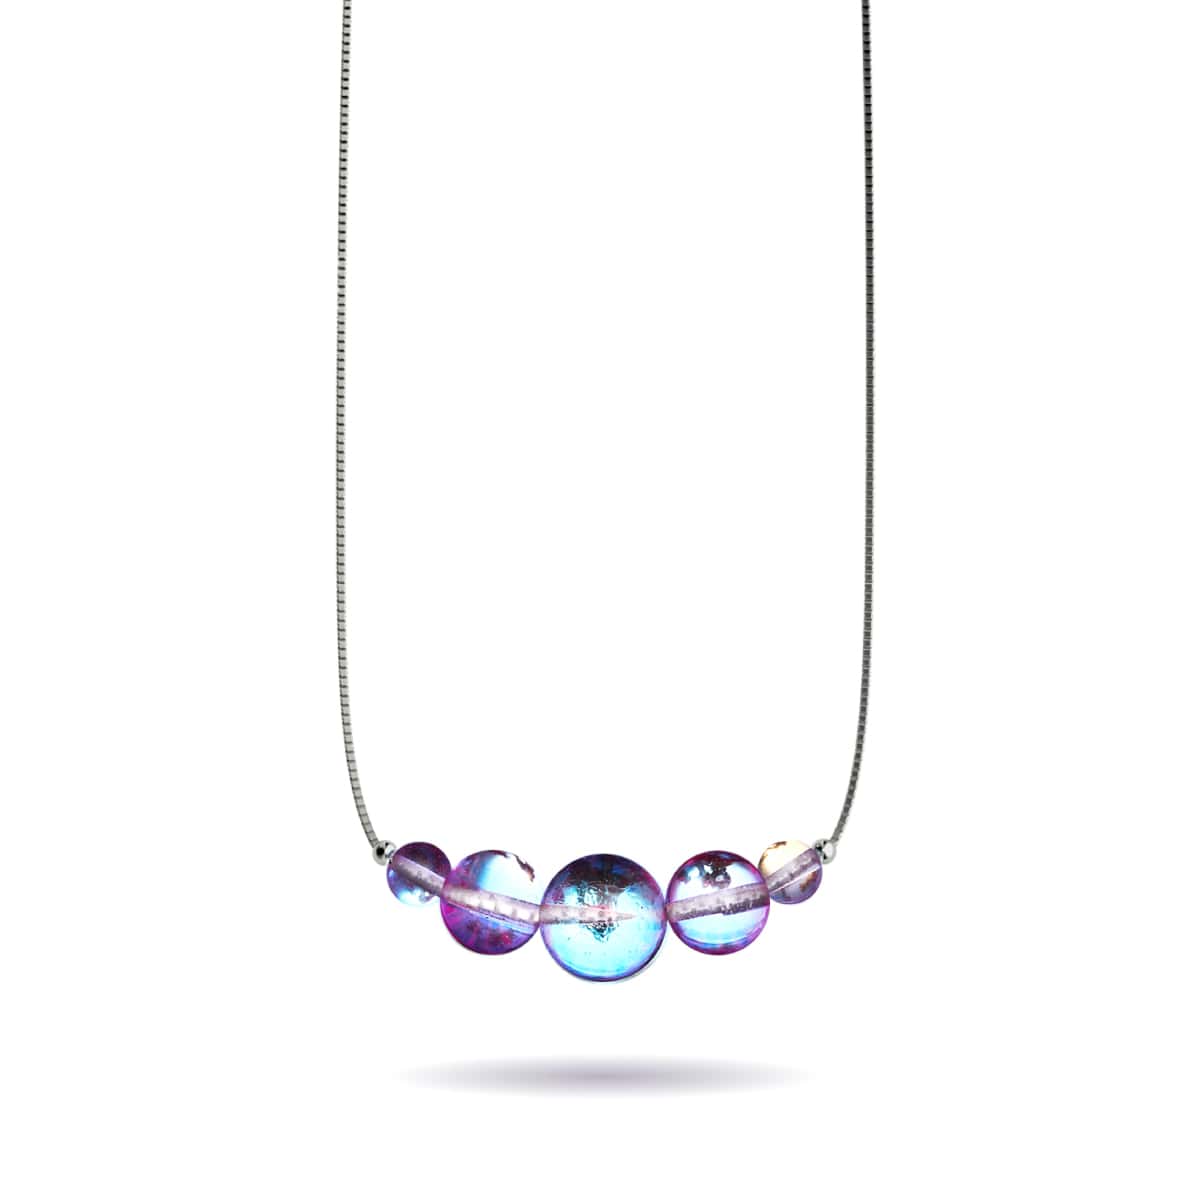 Ultraviolet | .925 Sterling Silver | Galaxy Glass Infinity Clasp Necklace